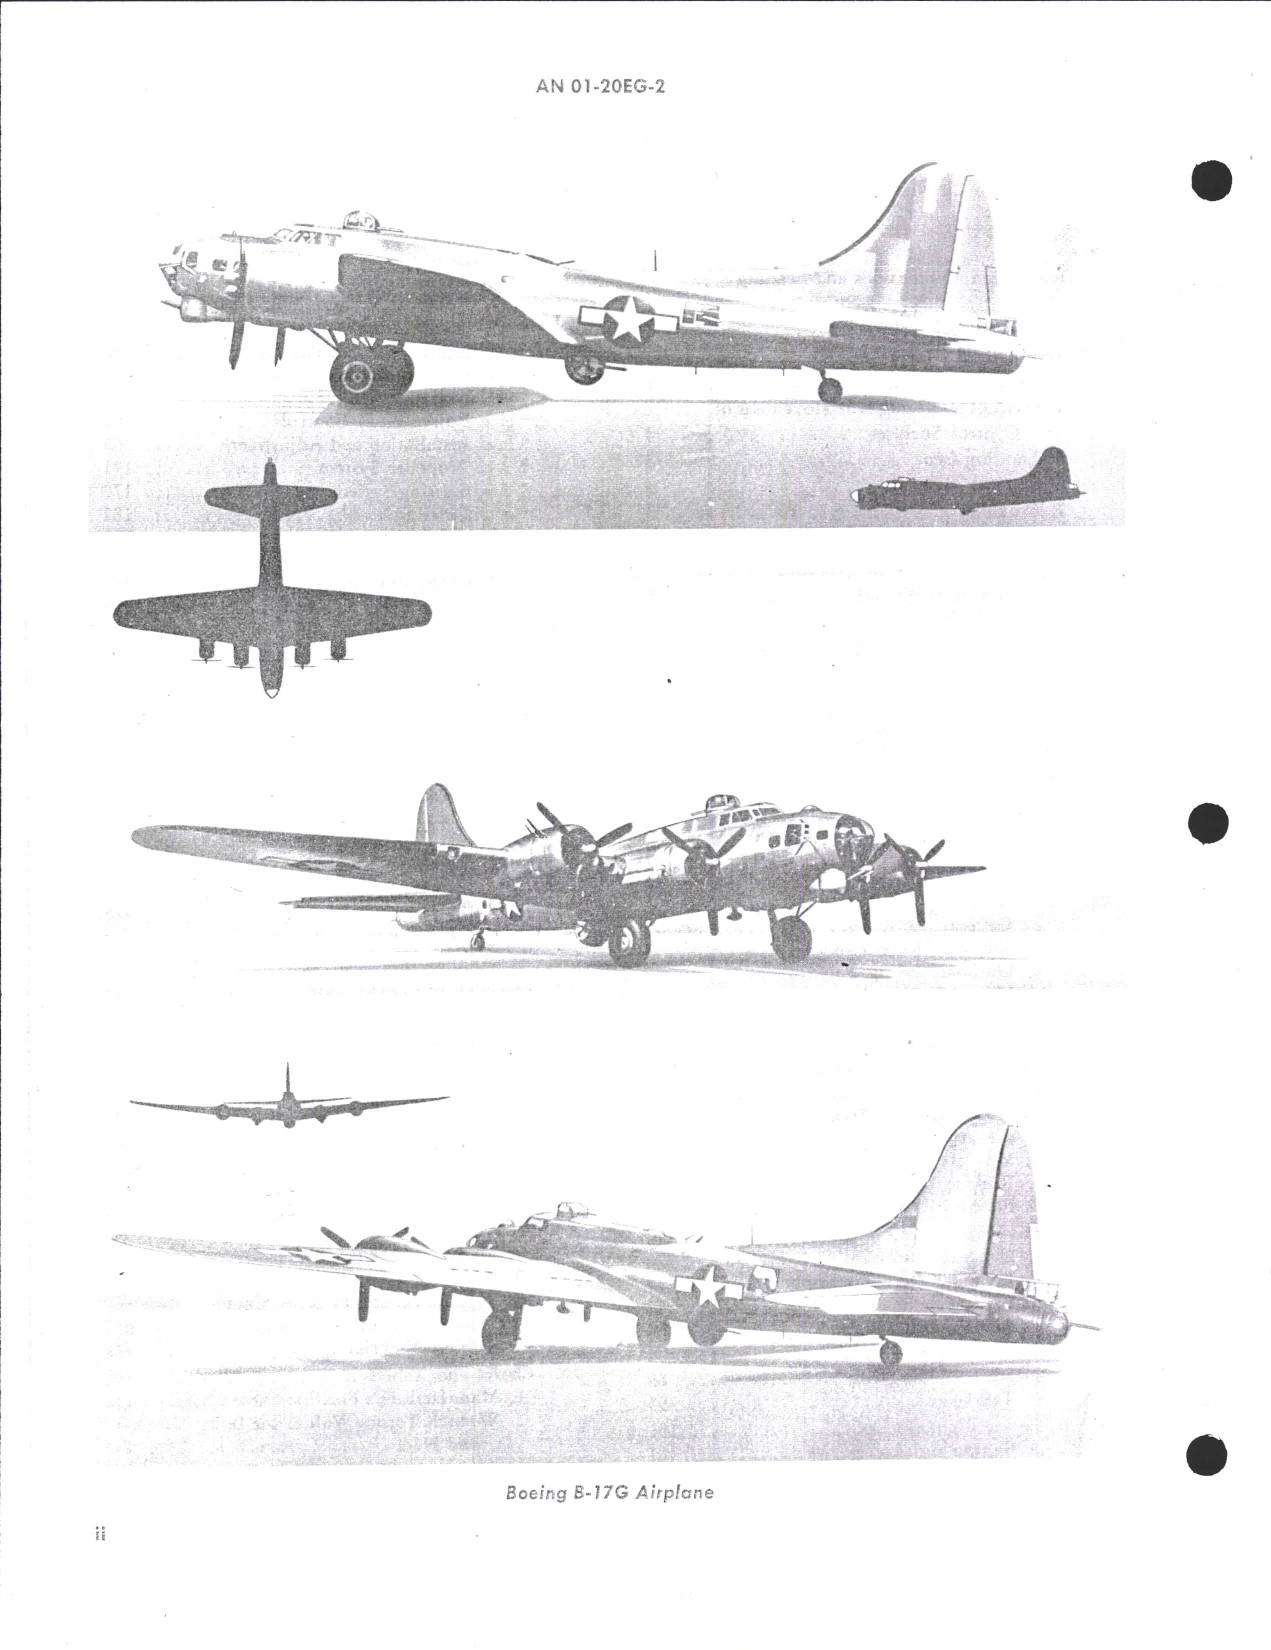 Sample page 6 from AirCorps Library document: Maintenance Instructions for B-17G Aircraft